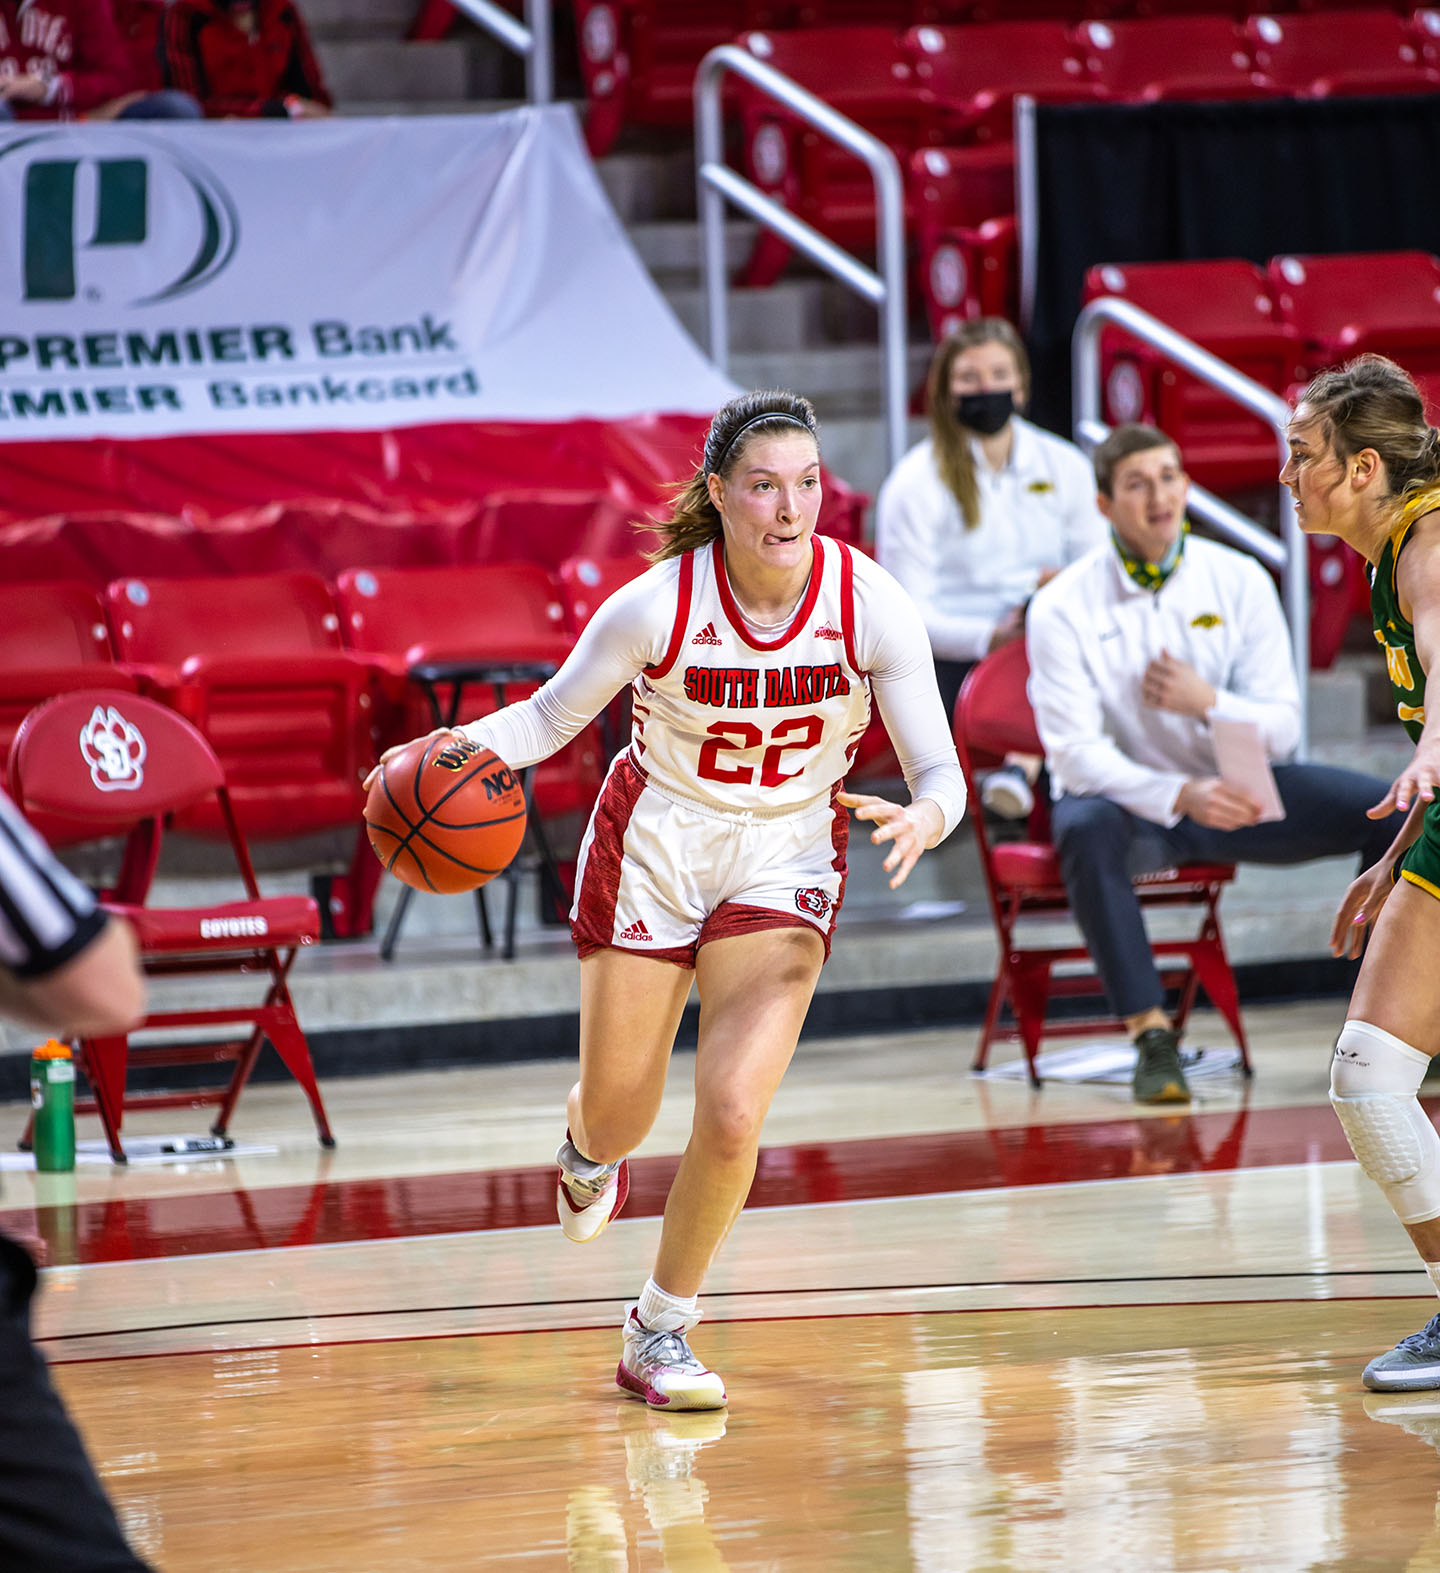 Senior women’s basketball players make decisions on extra year of eligibility